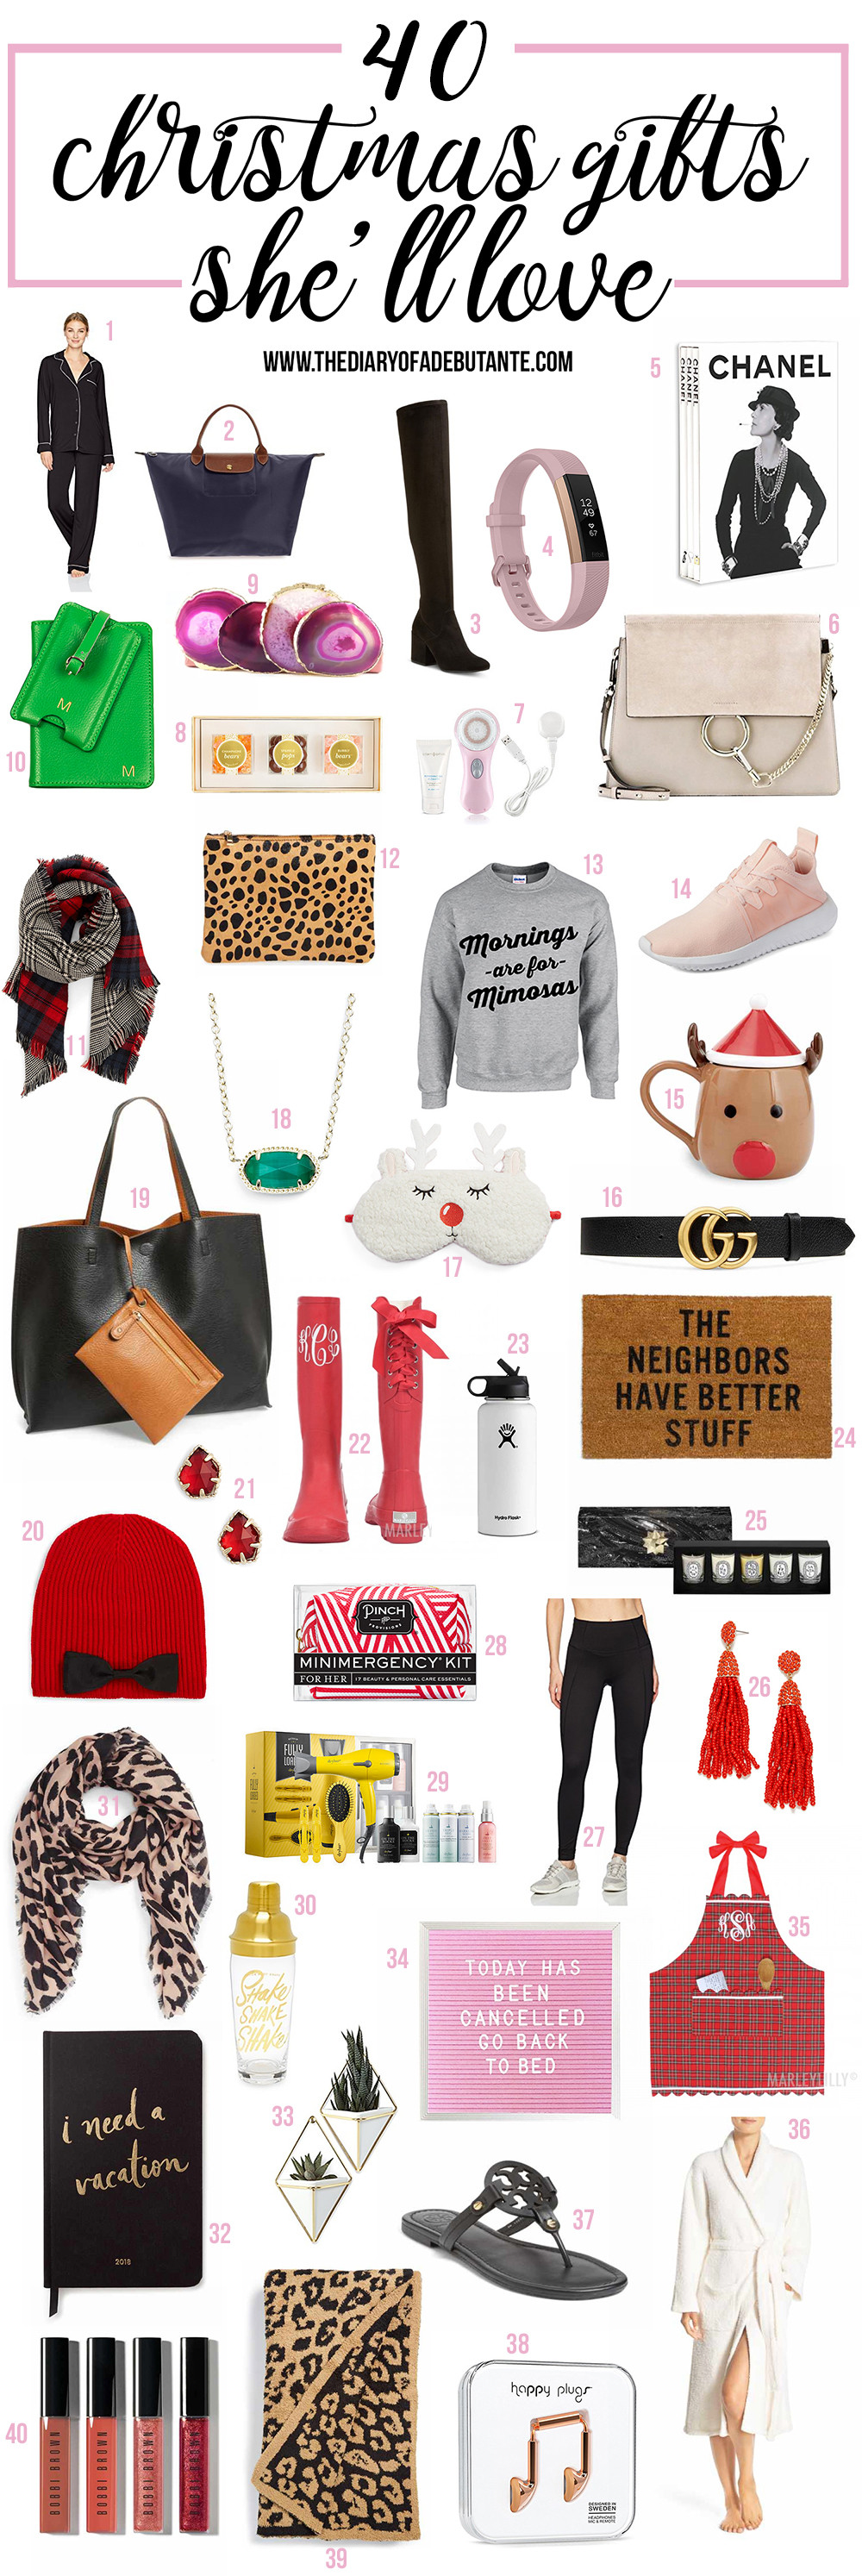 Christmas Gift Ideas For Girlfriend
 Cool Gift Ideas for Girlfriend Mom or BFF this Holiday